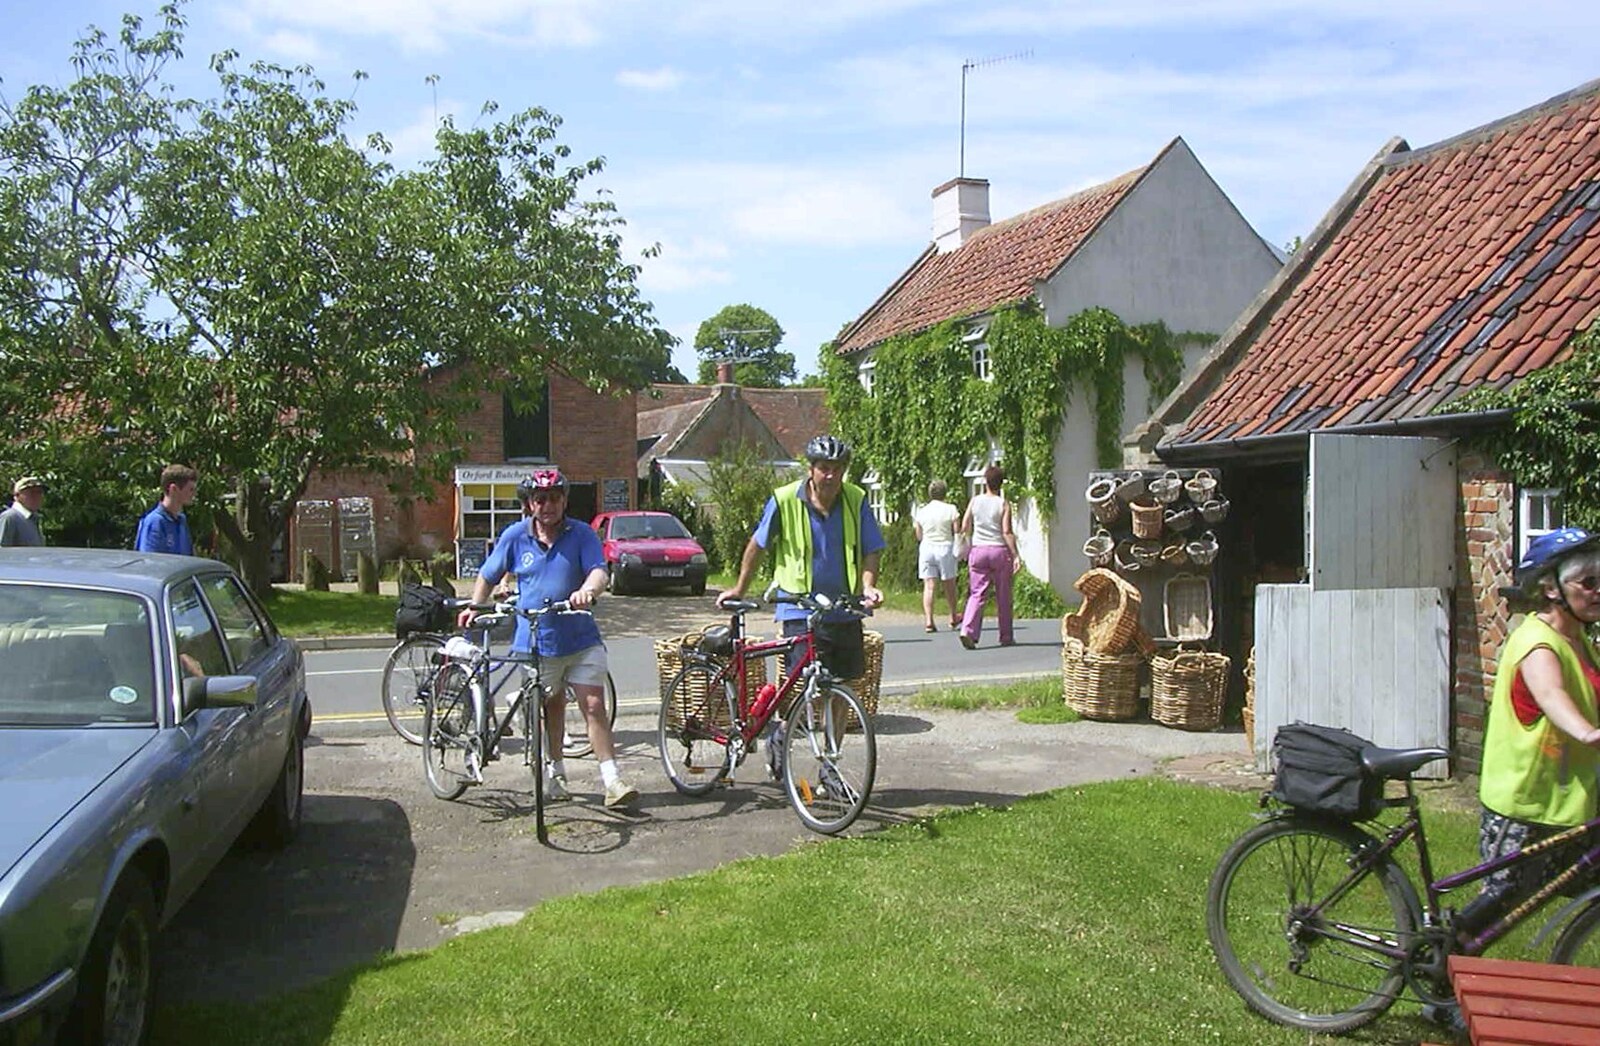 The BSCC Annual Bike Ride, Orford, Suffolk - 12th July 2003: Rocking up to the King's Head at Orford